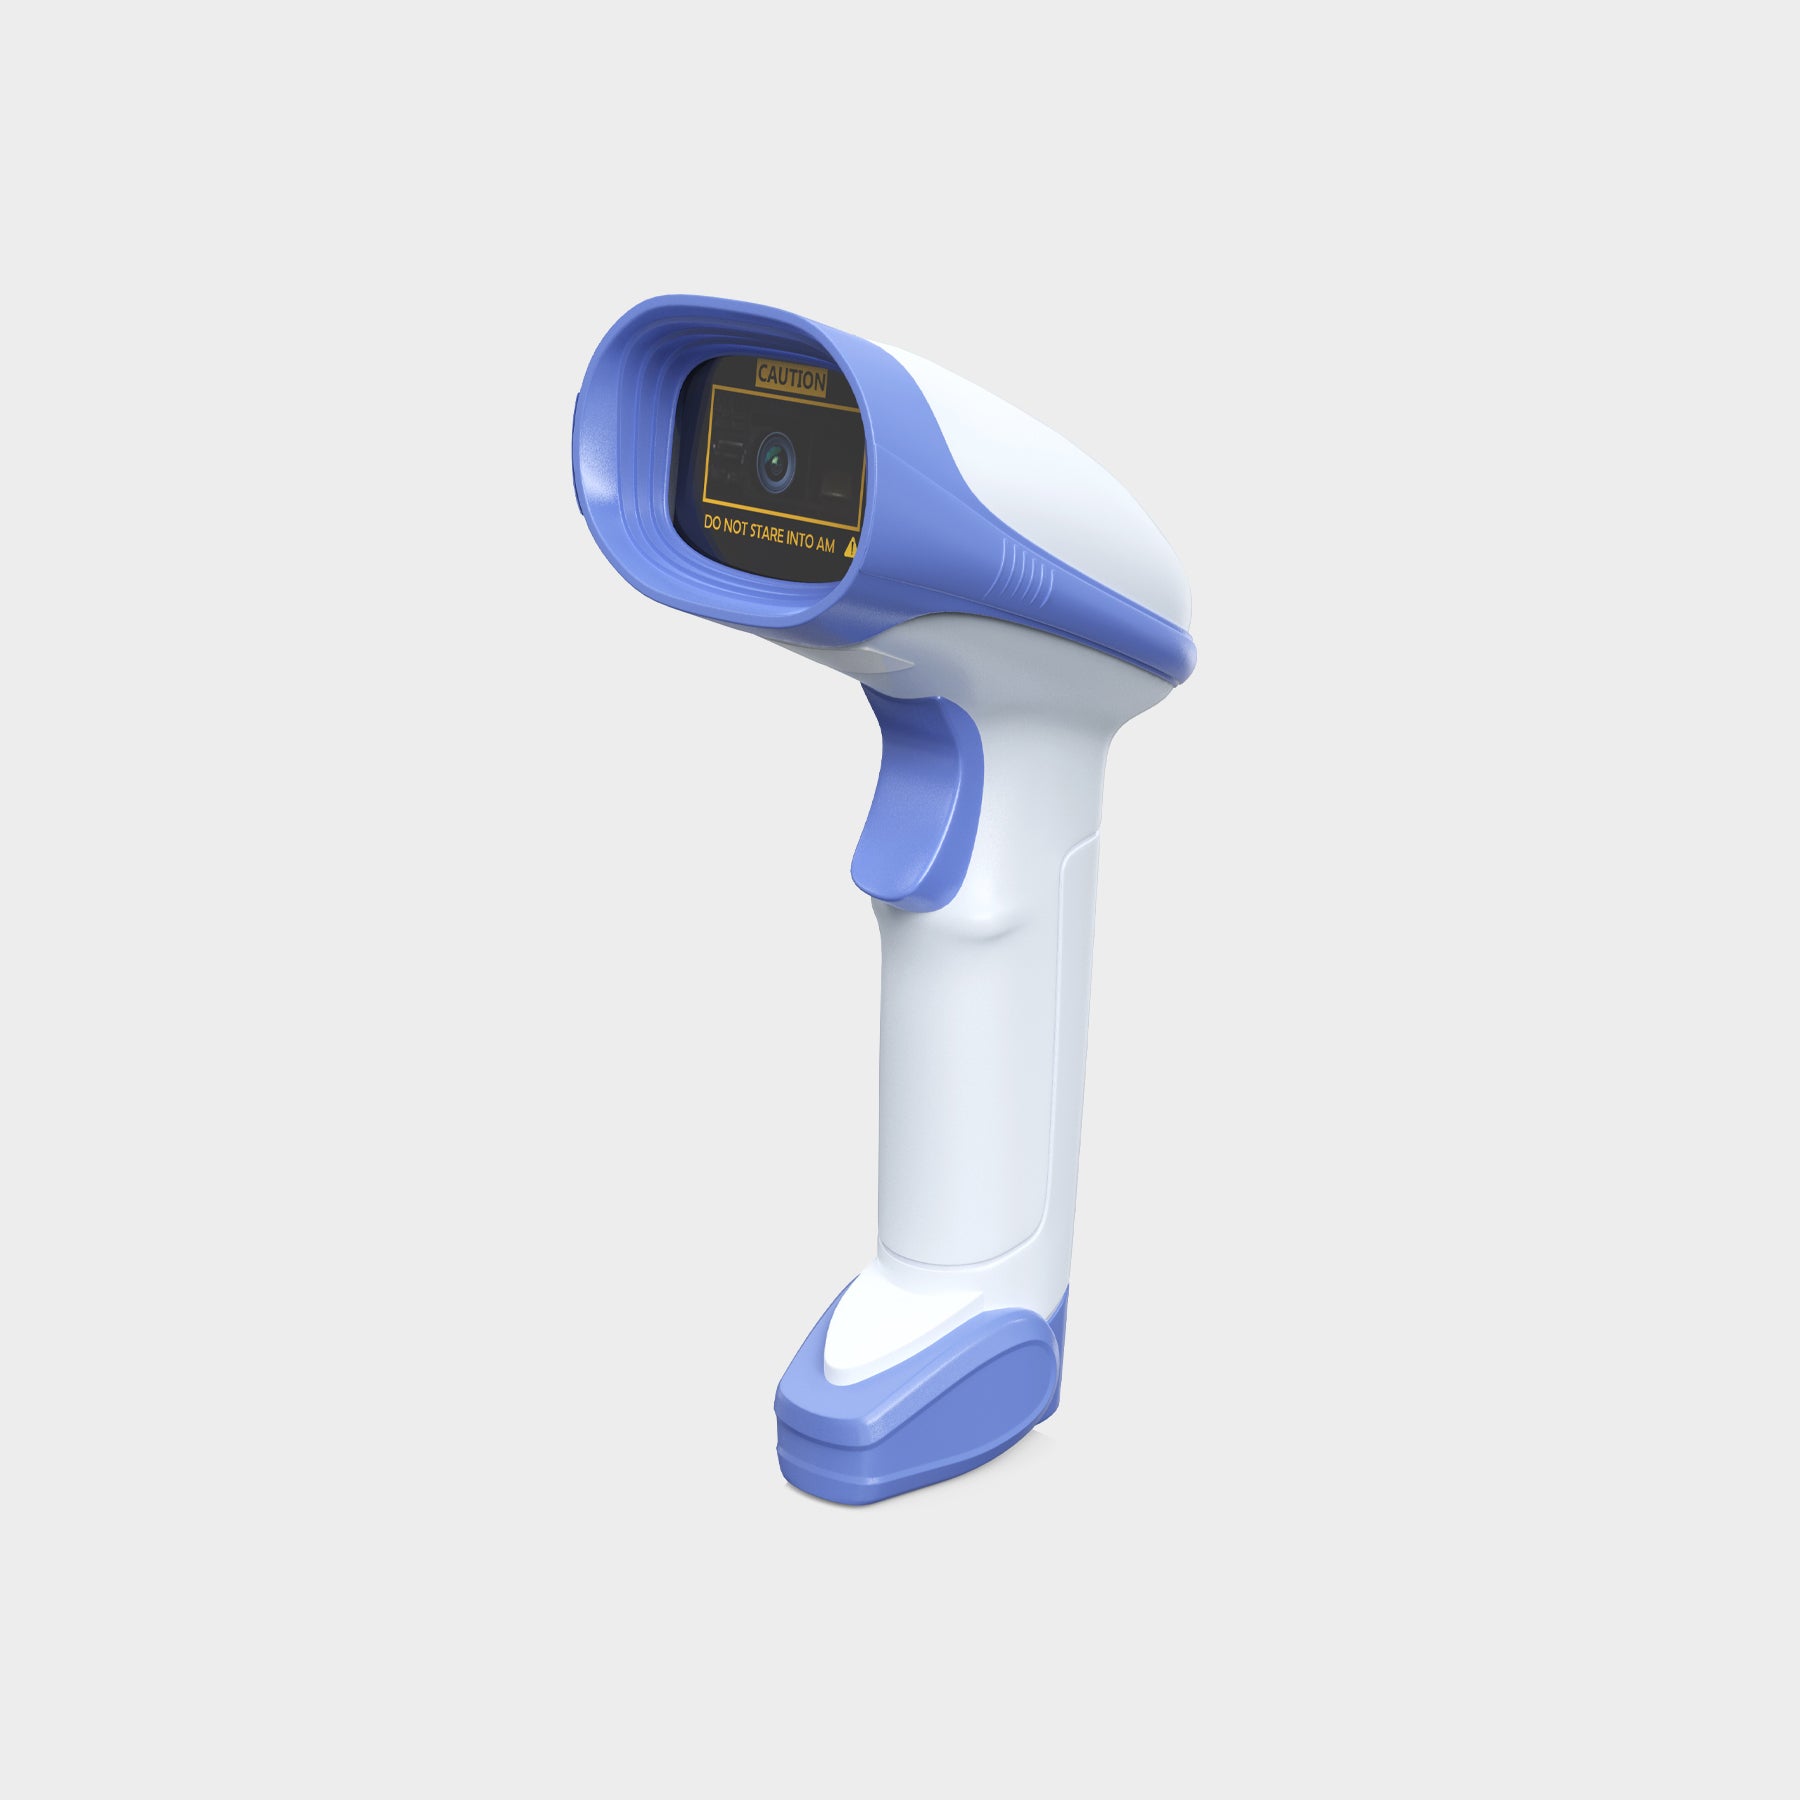 AMBIR BR200 Wireless Barcode Scanner with 2.4Ghz with Wireless USB Dongle - White/Blue (BR200-WH)